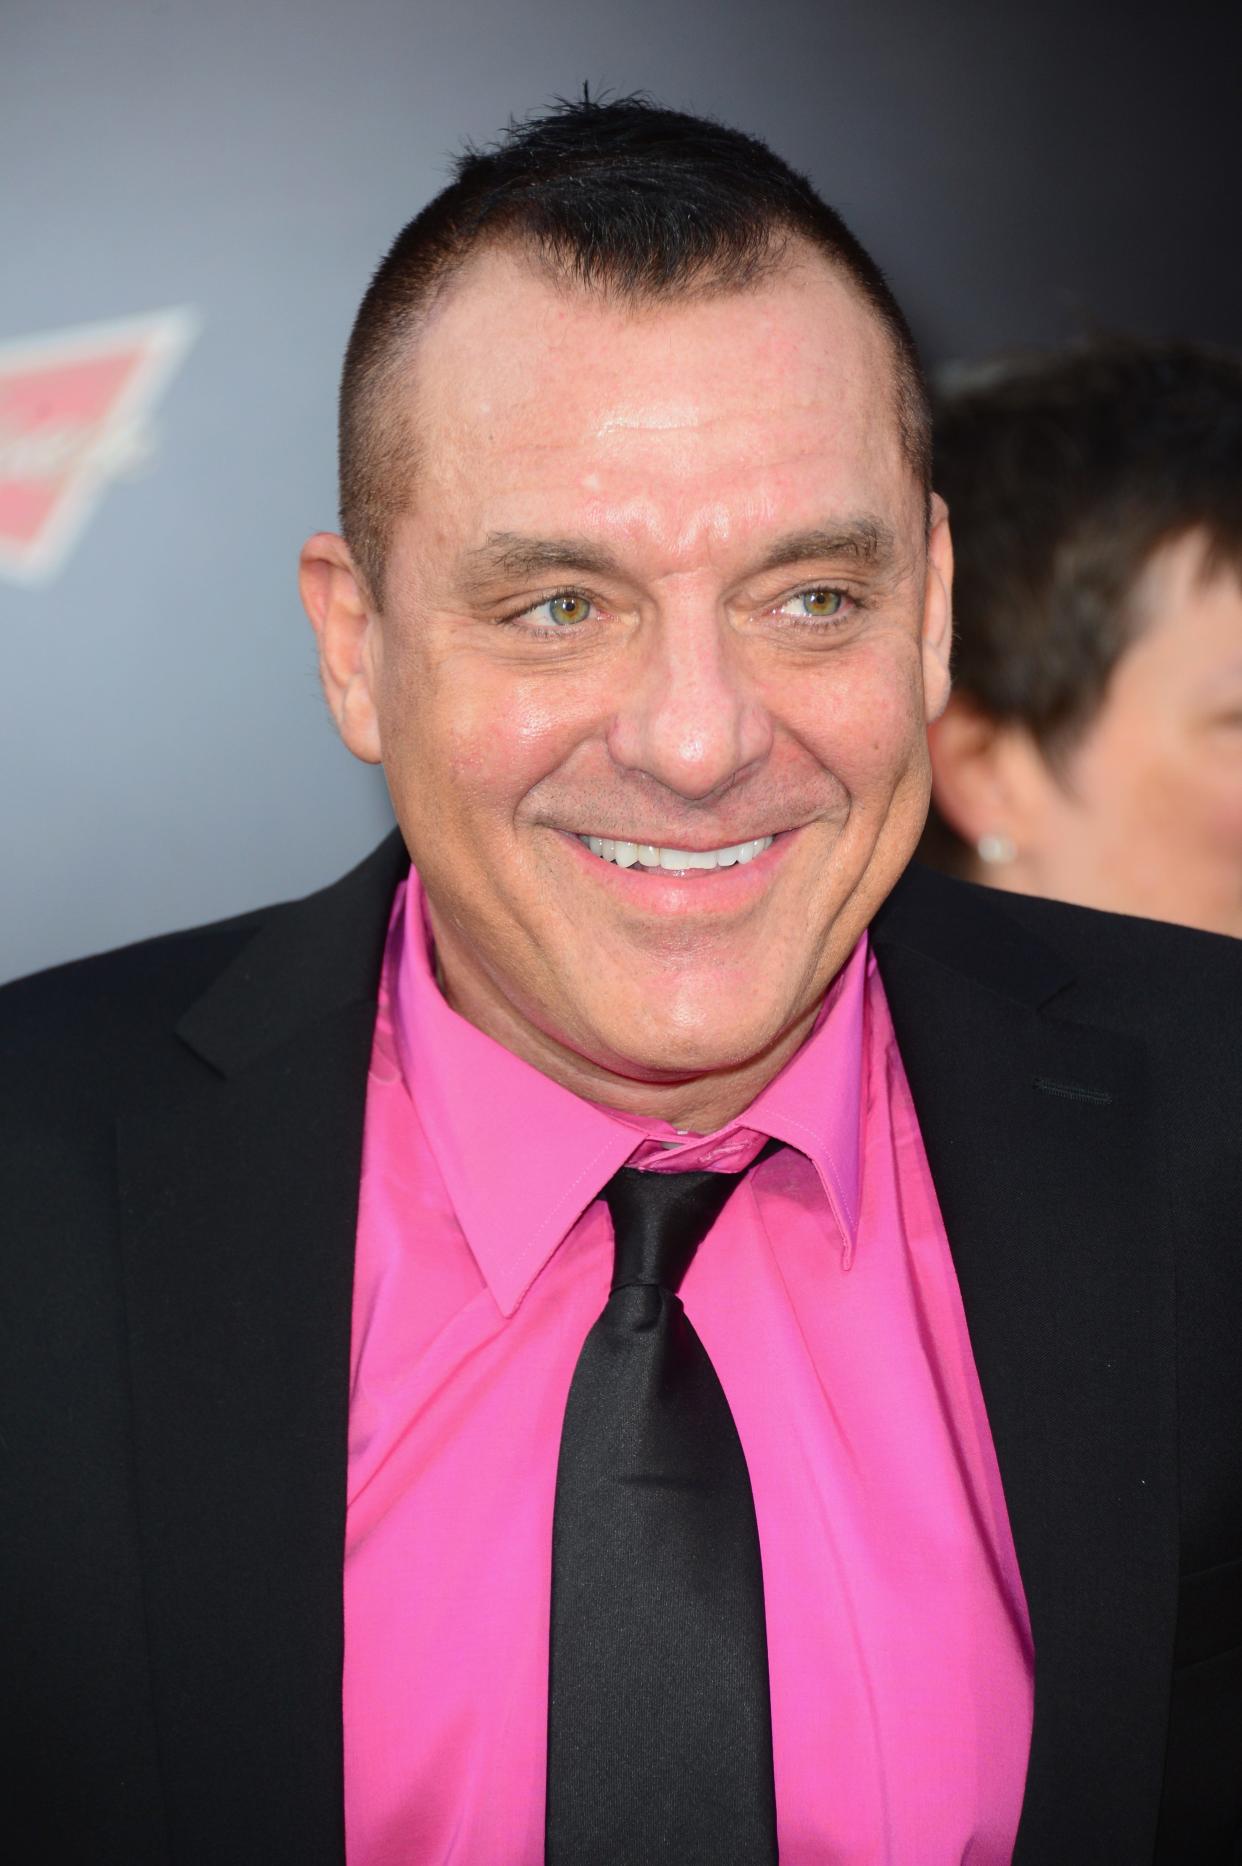 Actor Tom Sizemore has died at age 61, after suffering a brain aneurysm.